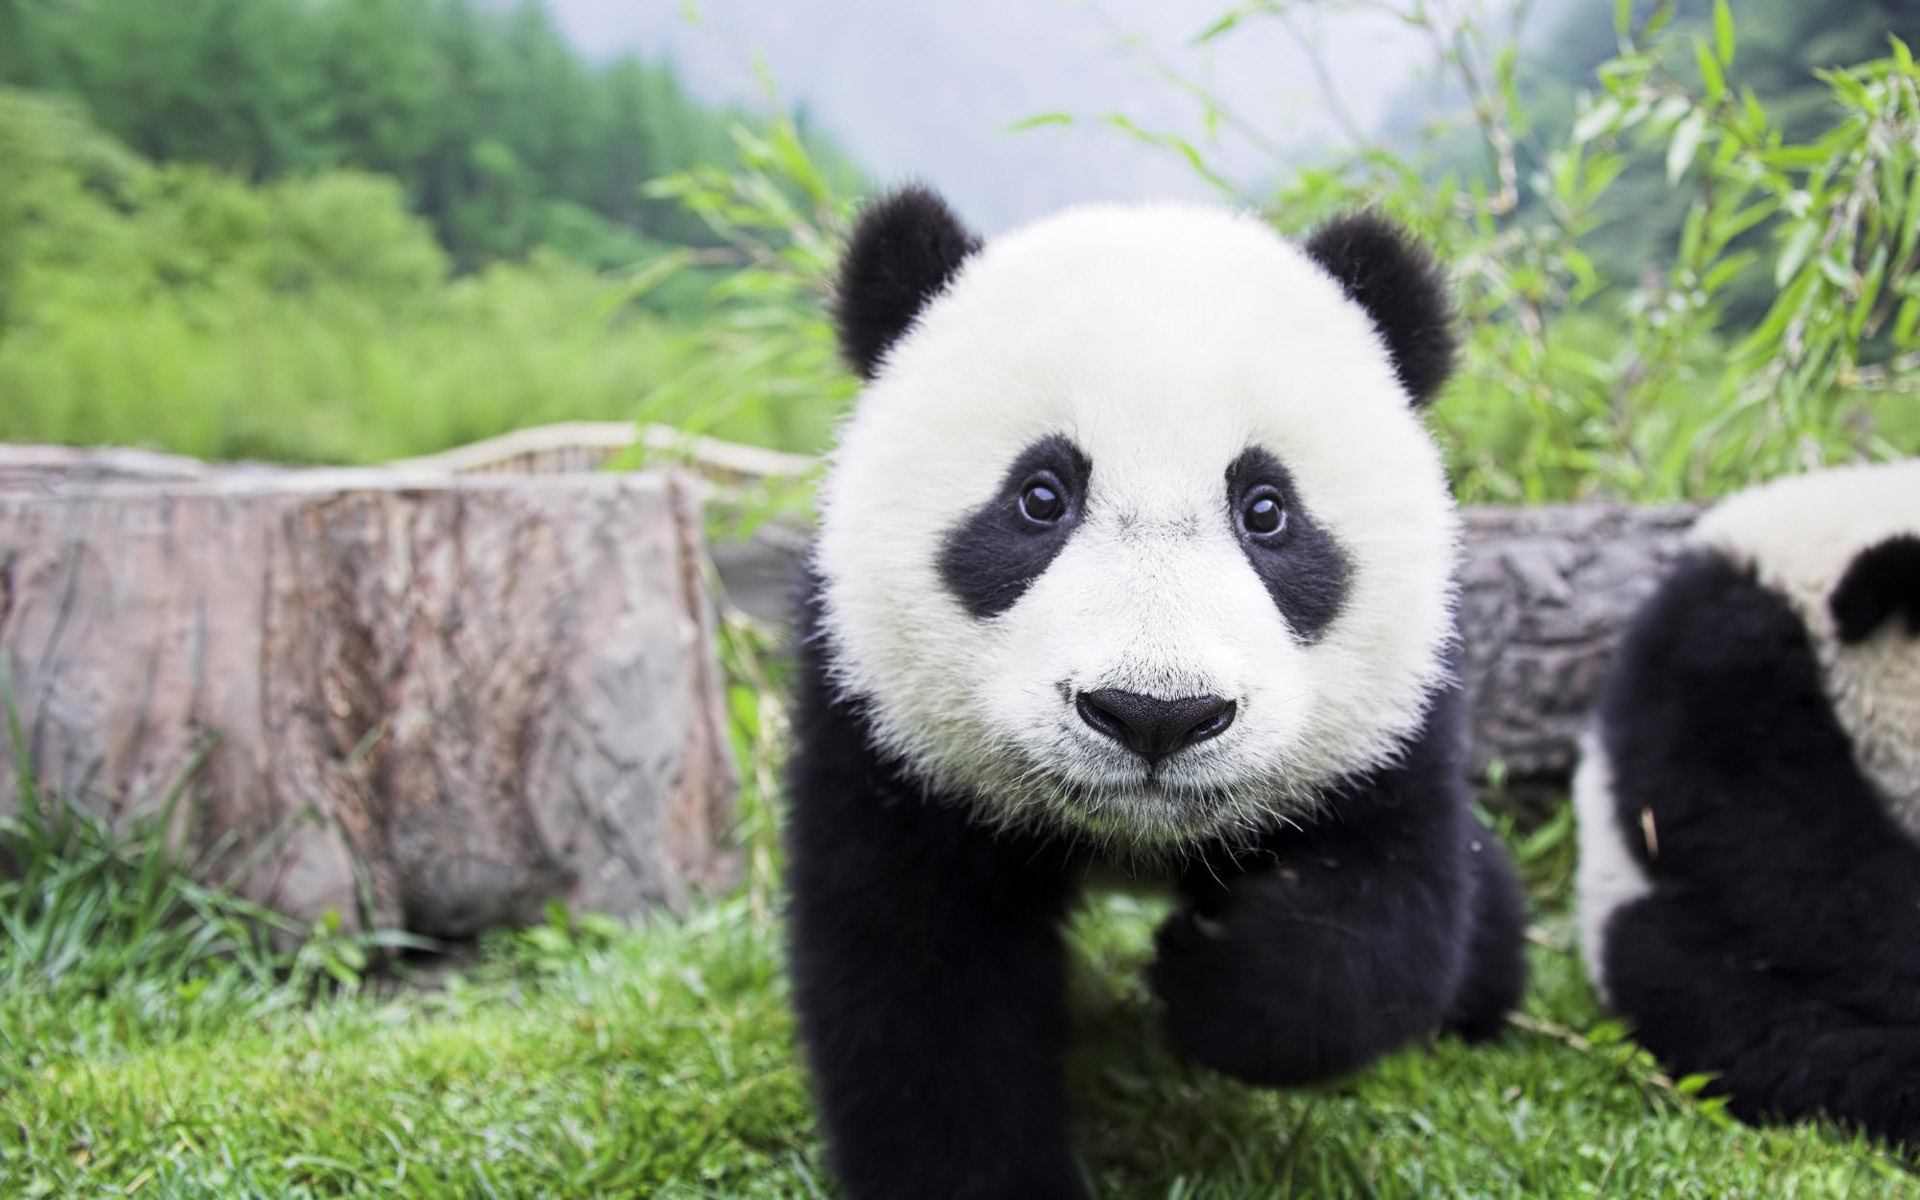 10. A baby panda has the same weight as a cup of tea at birth